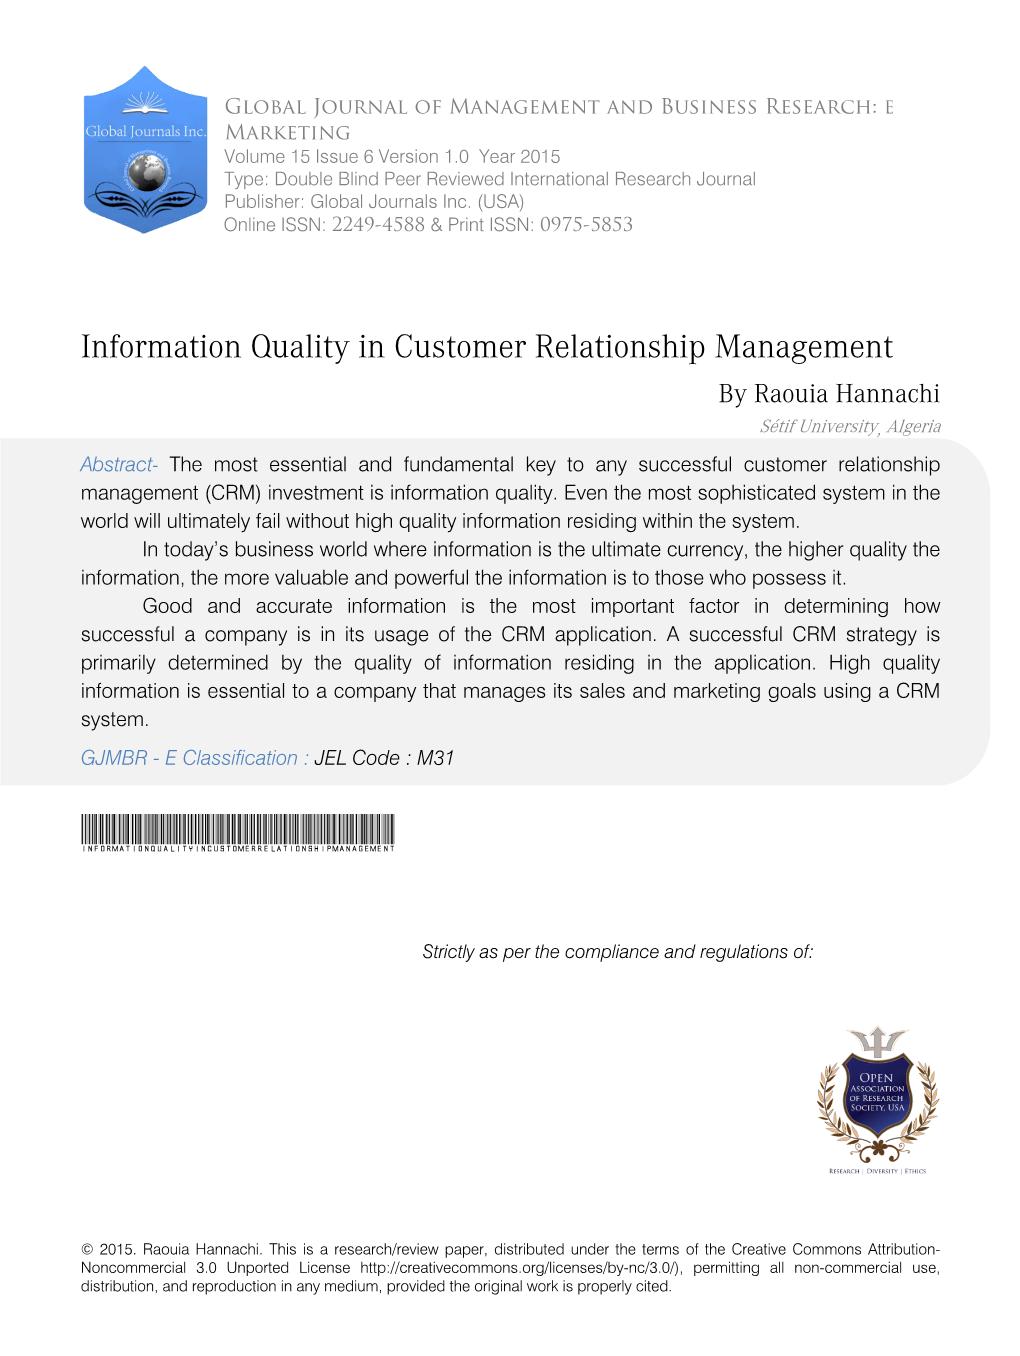 Information Quality in Customer Relationship Management